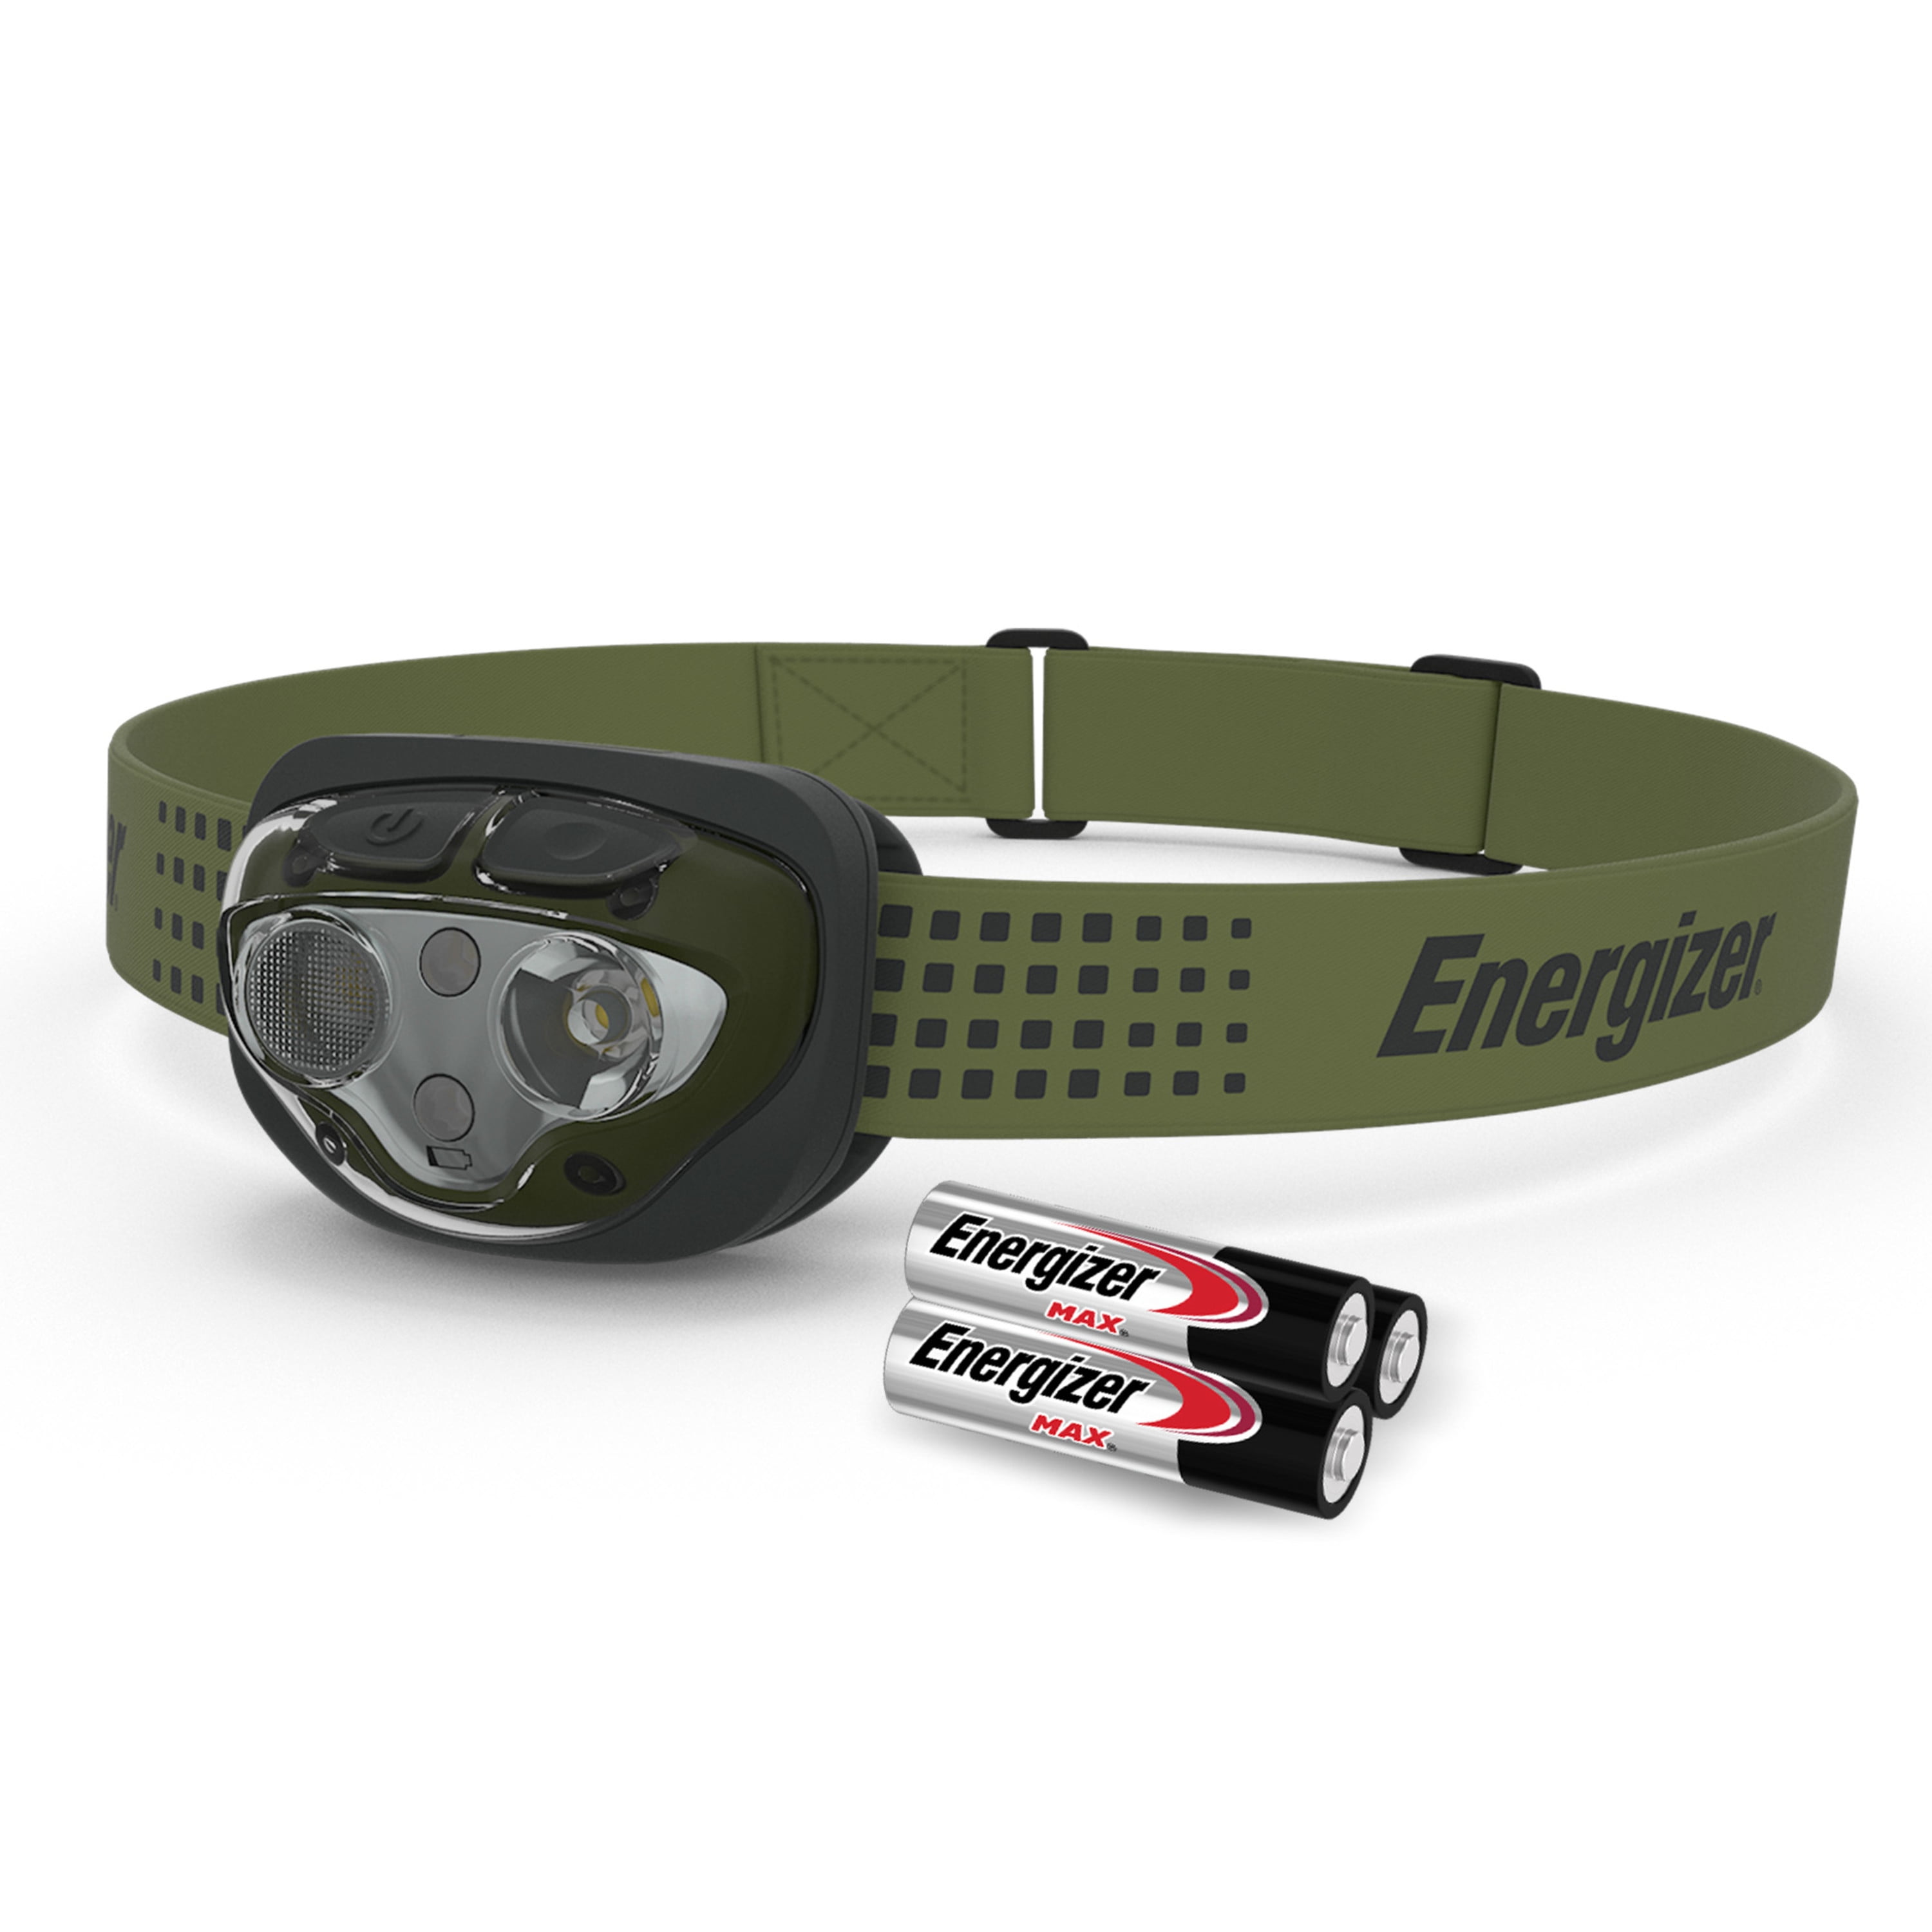 Energizer Vision HD+ 550 Lumen Extreme LED Headlamp, Includes (3) AAA Batteries